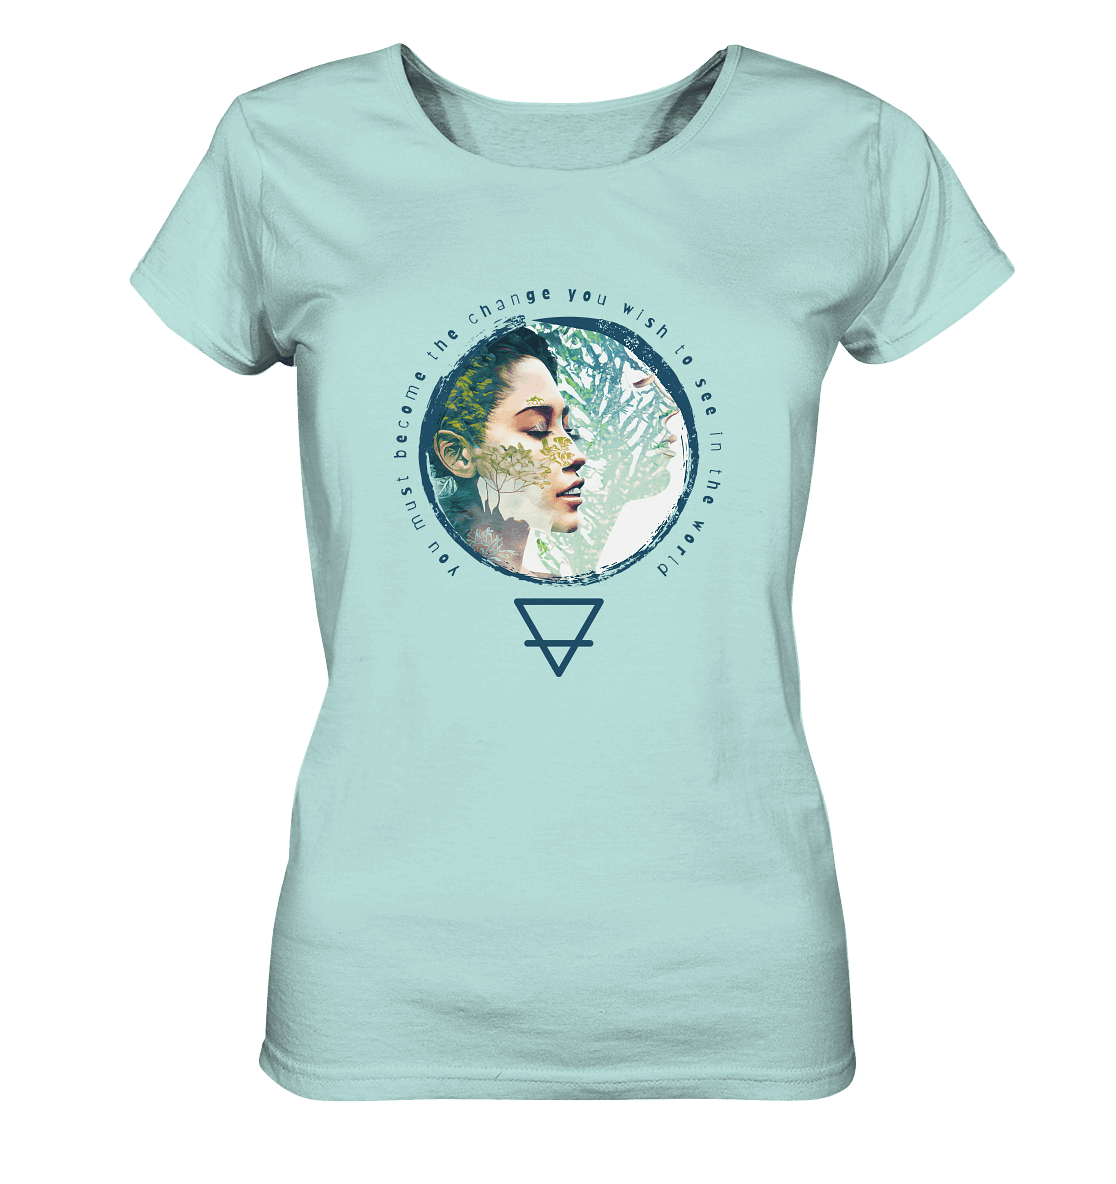 Nature - You must become the change you wish to see in the world - Ladies Organic Shirt